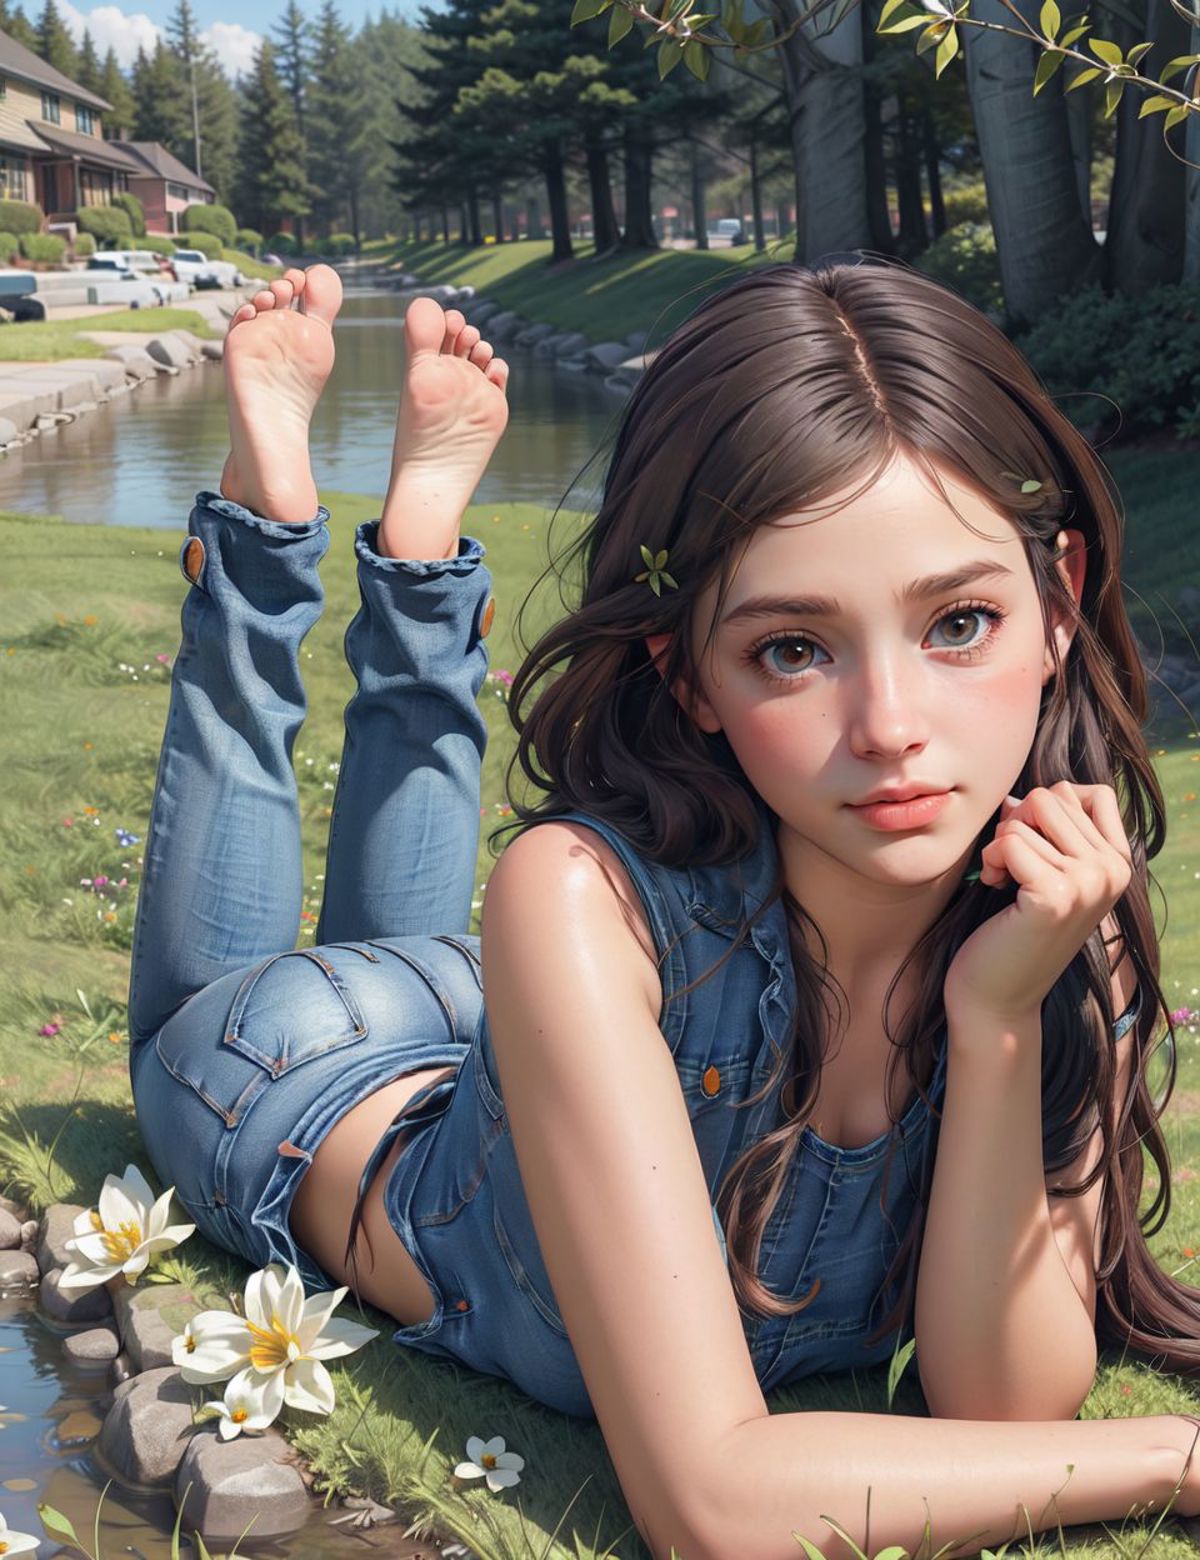 An artistic rendering of a woman lying on the grass in a field.